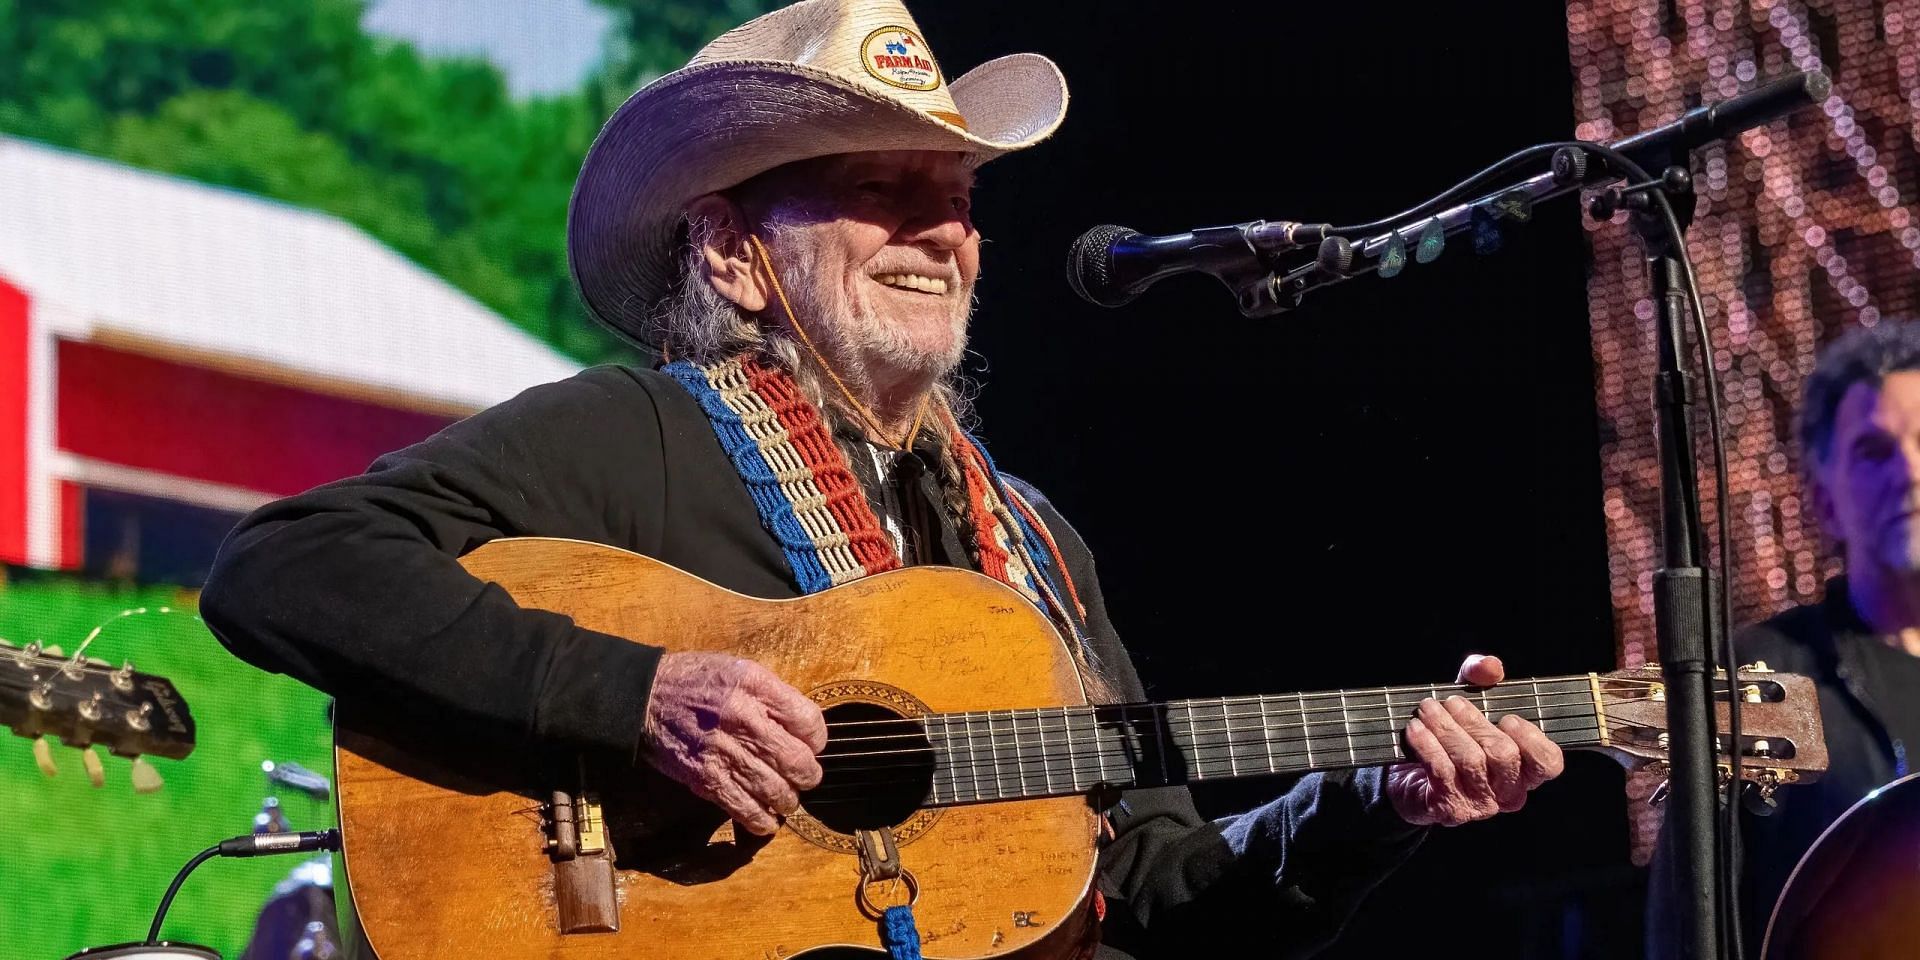 In recent years, Willie Nelson